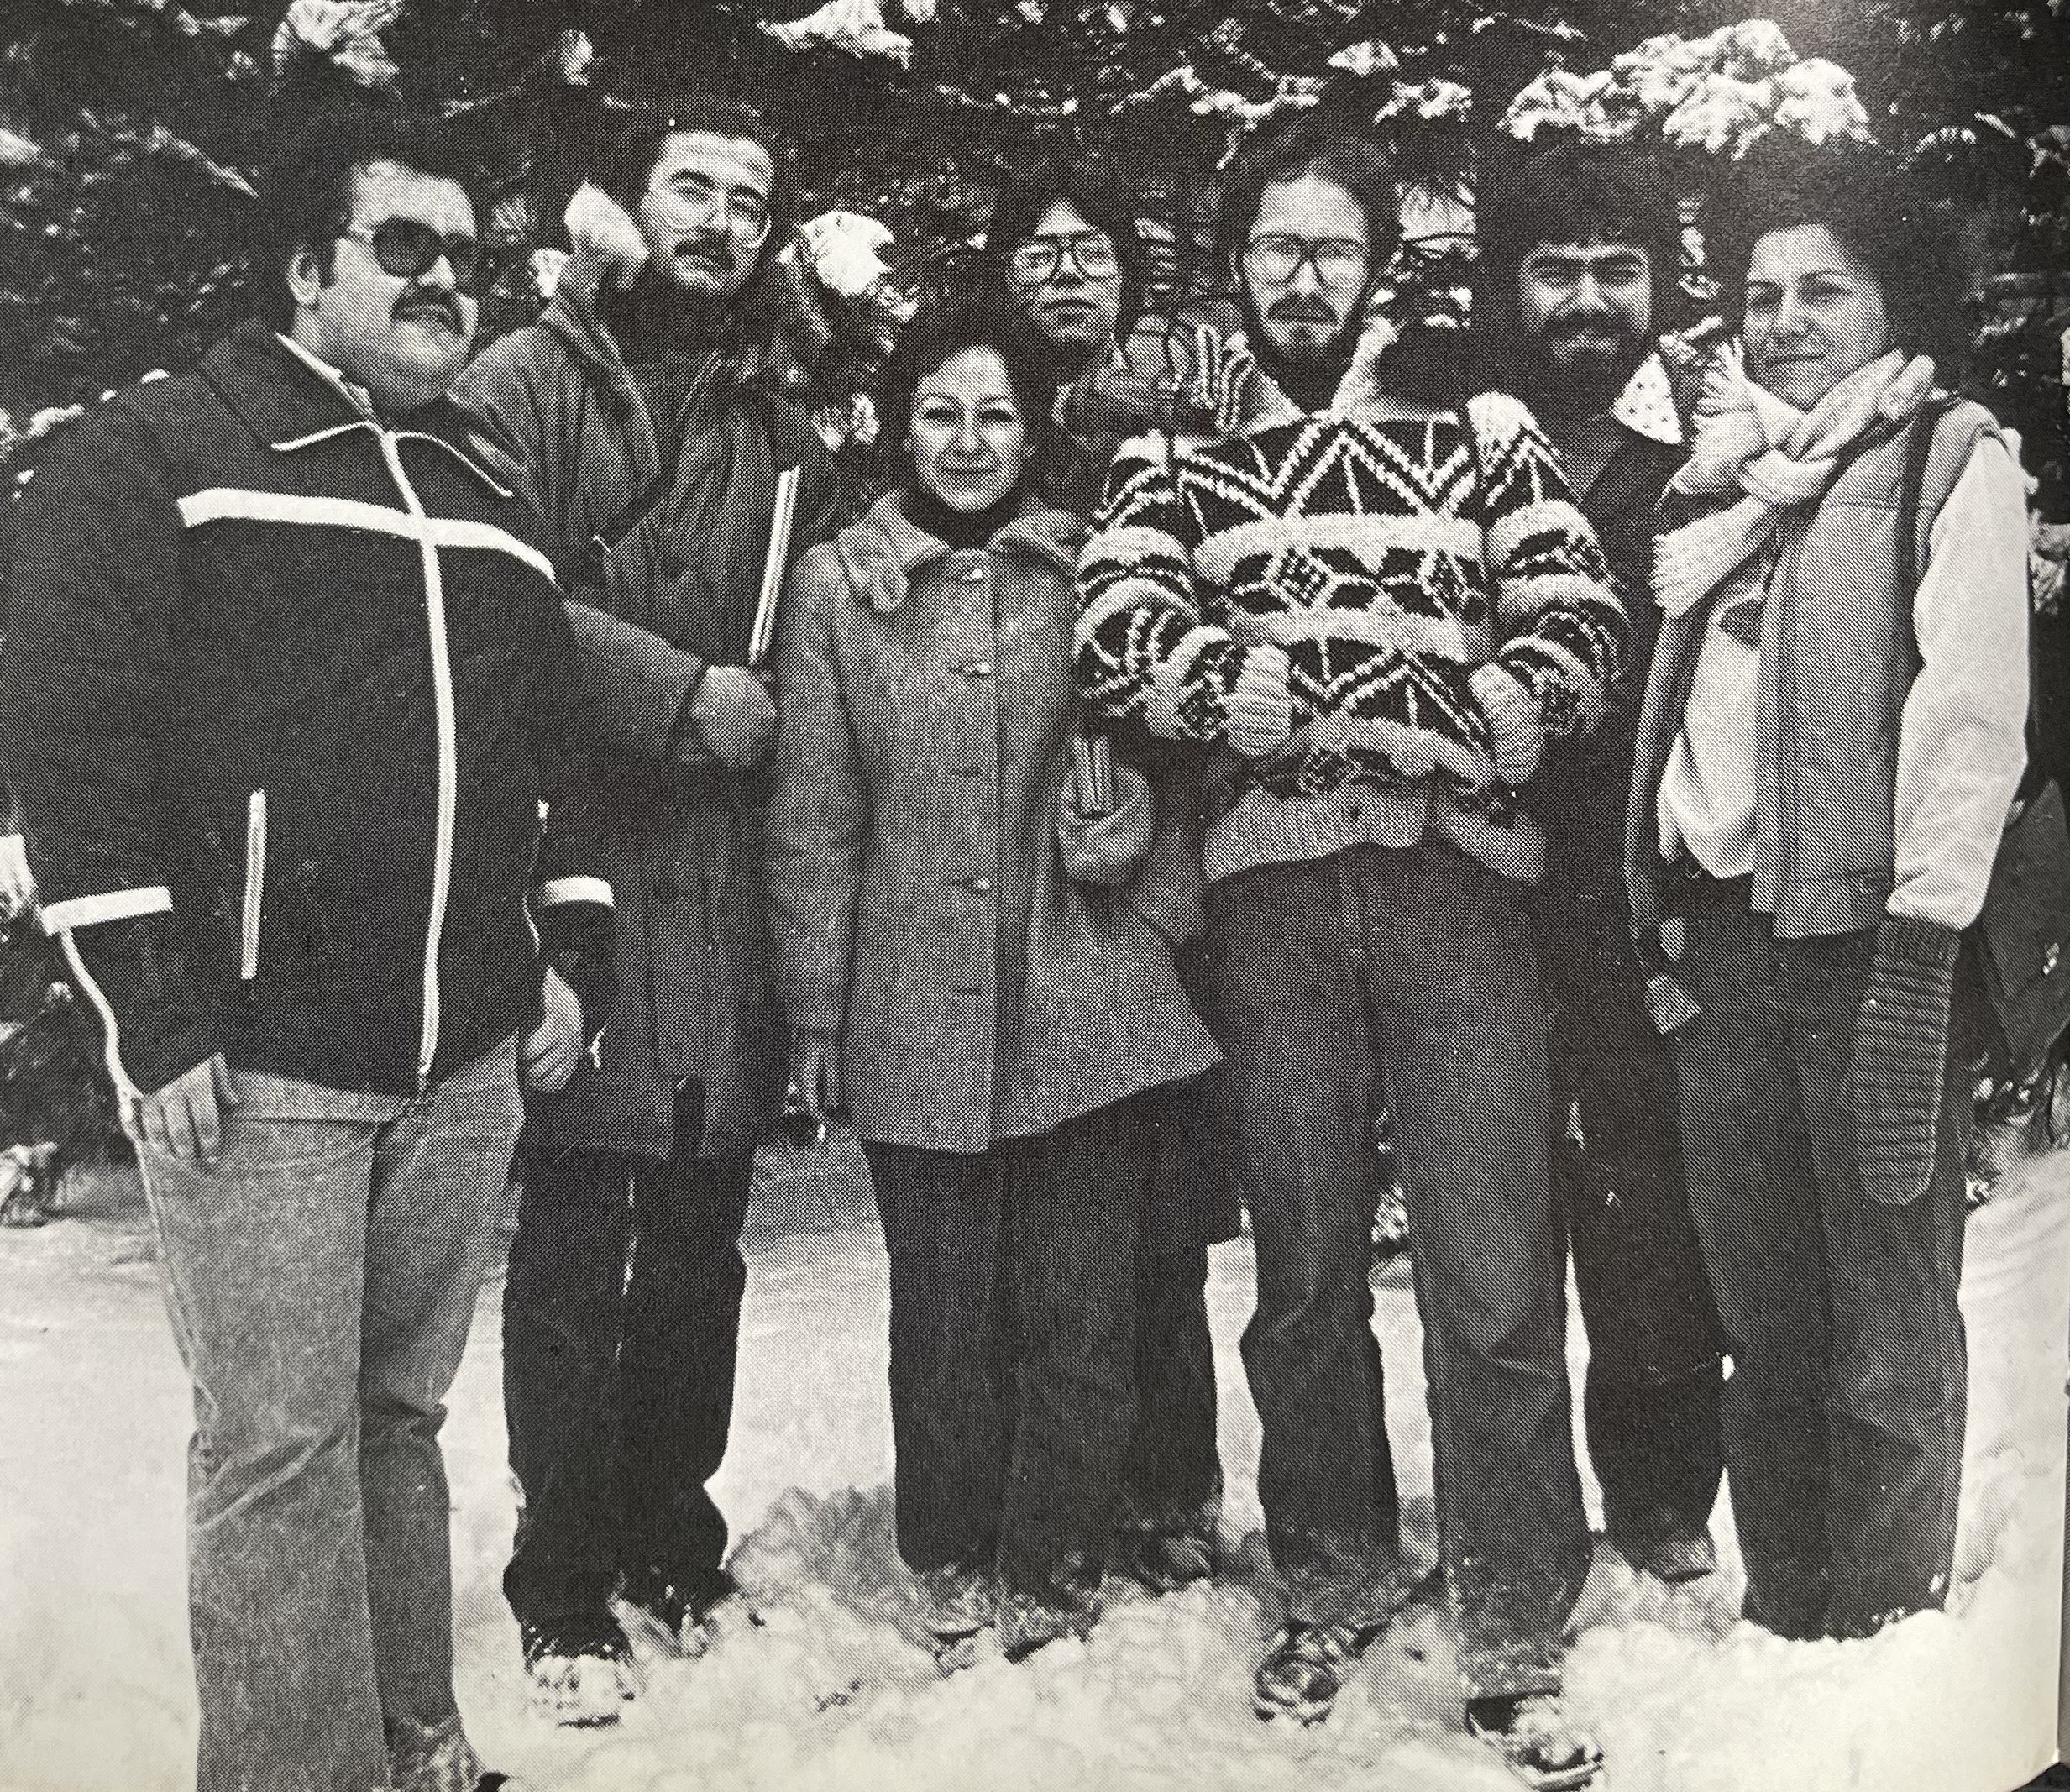 Group of students posing outside against snowy background wearing winter jackets. 